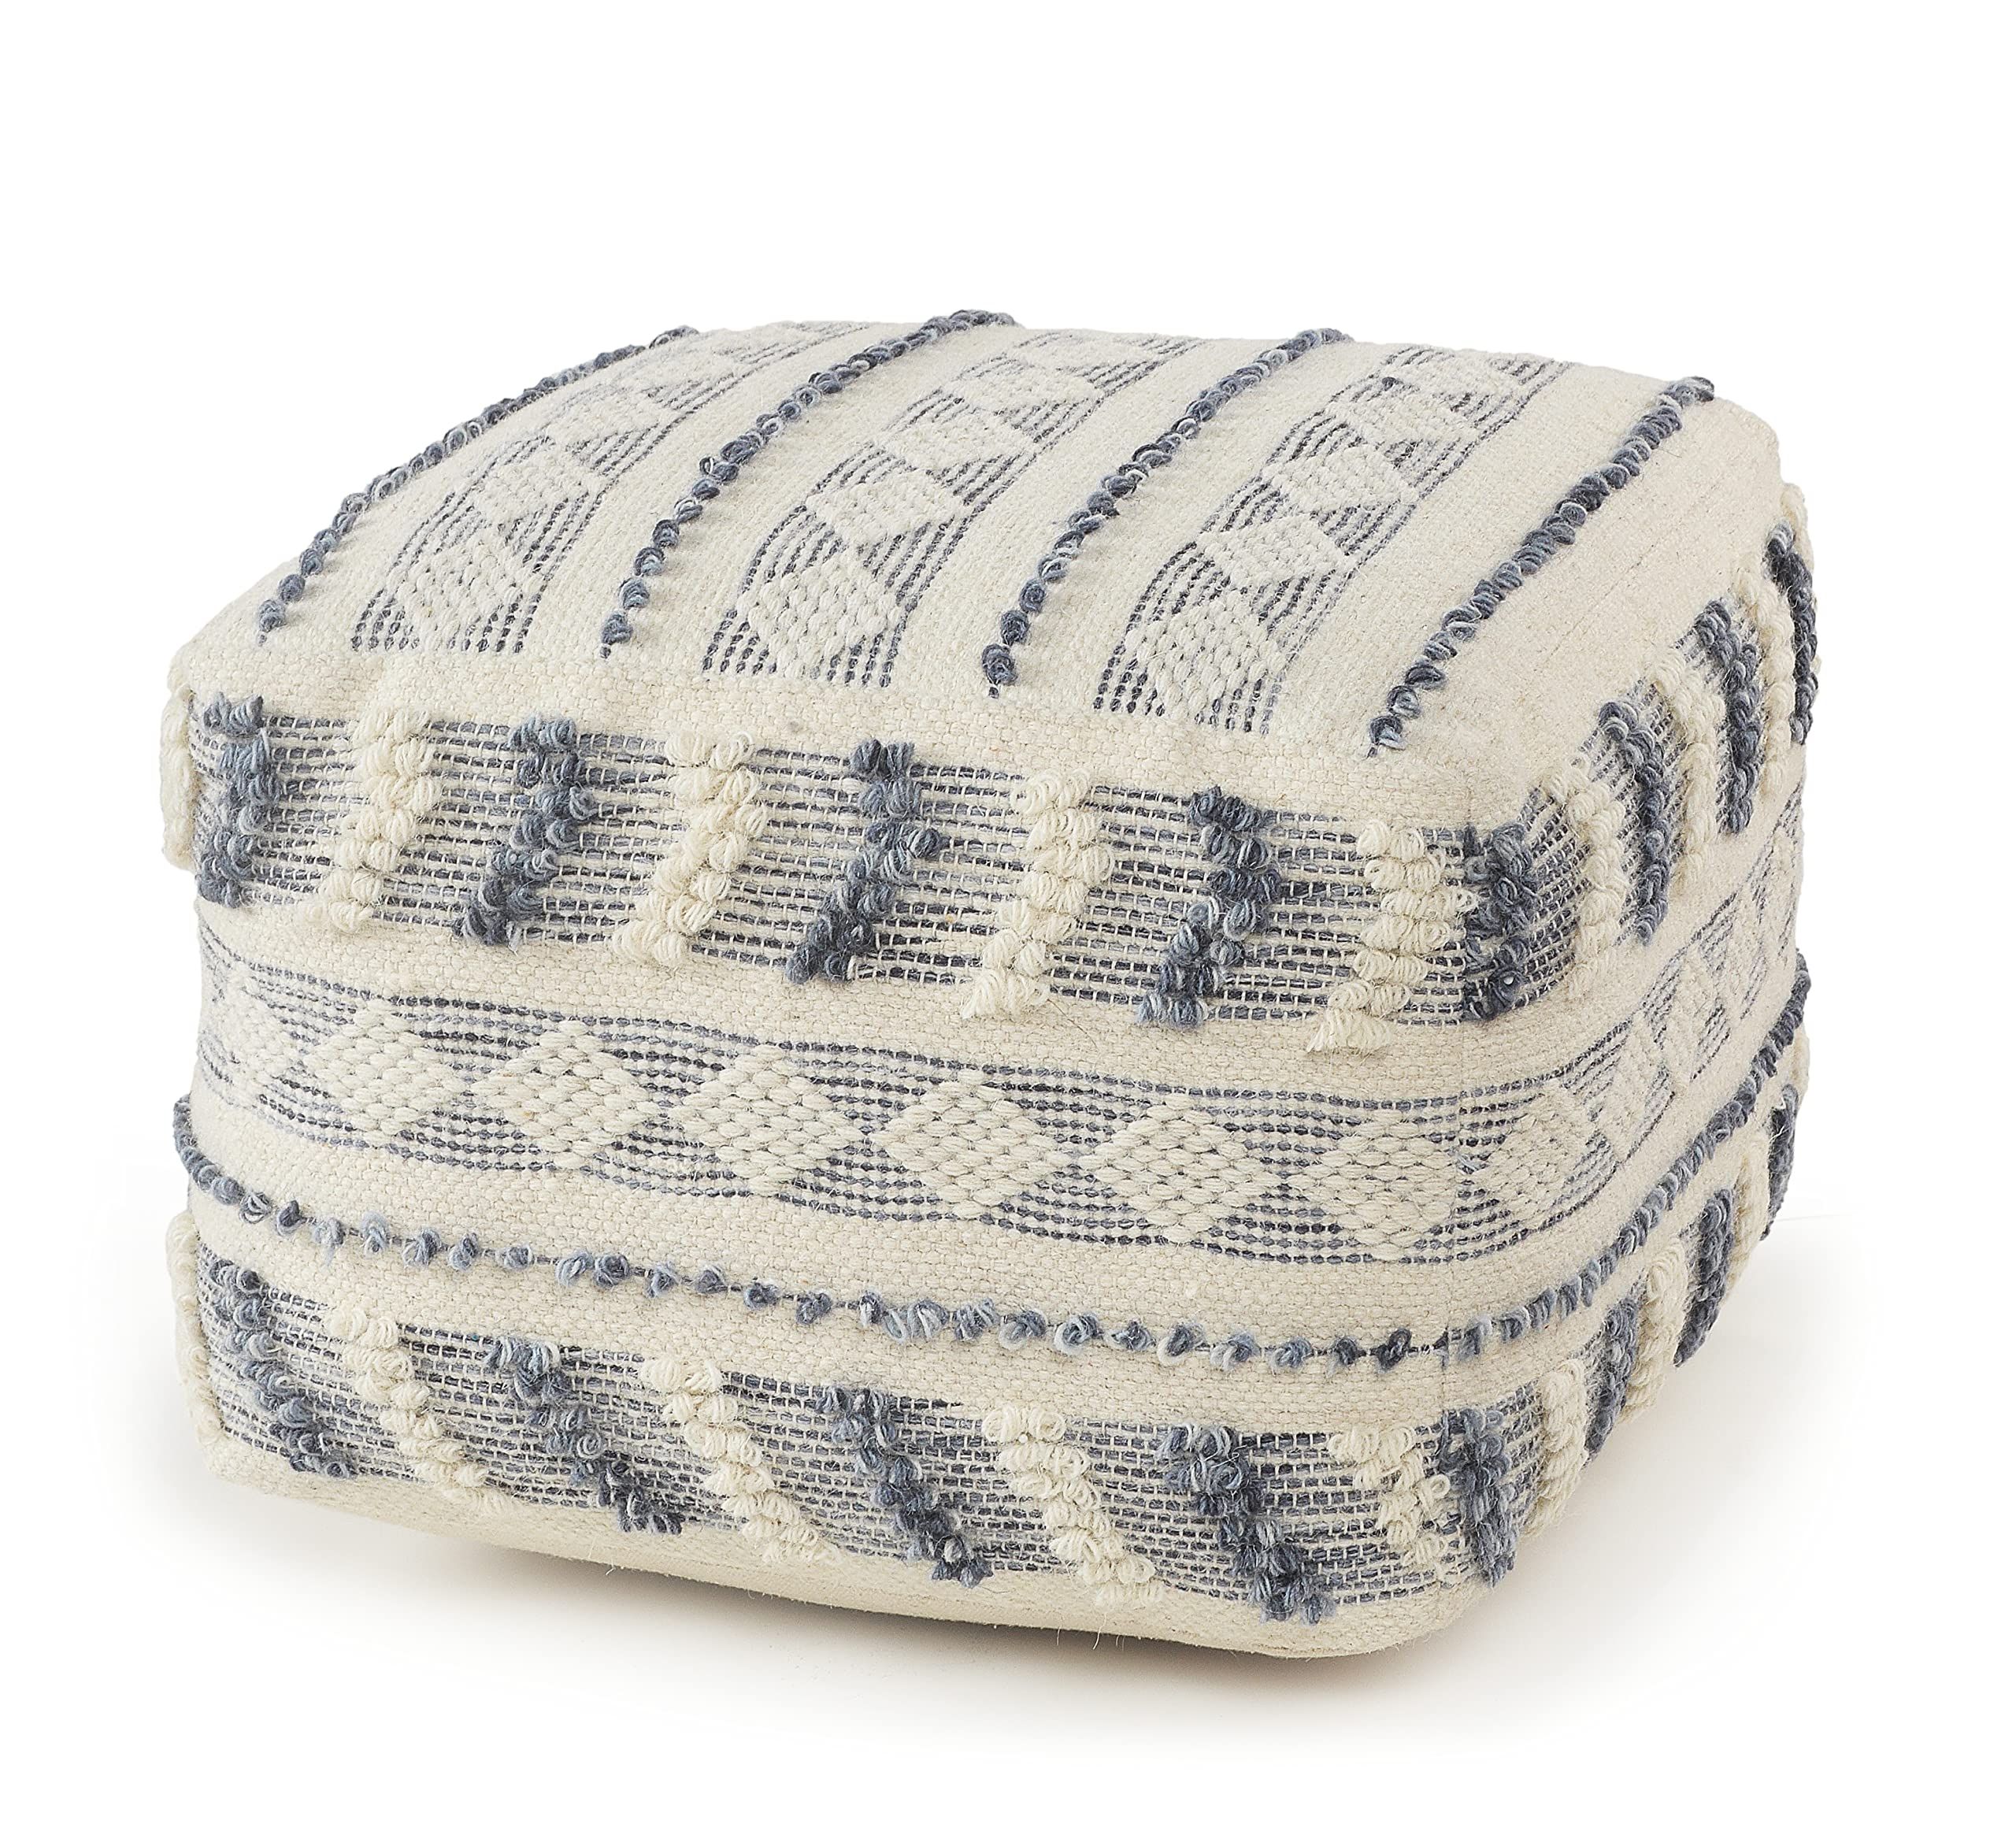 Most Recent Soft Ivory Geometric Ottomans Pertaining To Amazon: Lr Home Navy And Ivory Tufted Geometric Pouf, Model : Home &  Kitchen (View 7 of 10)